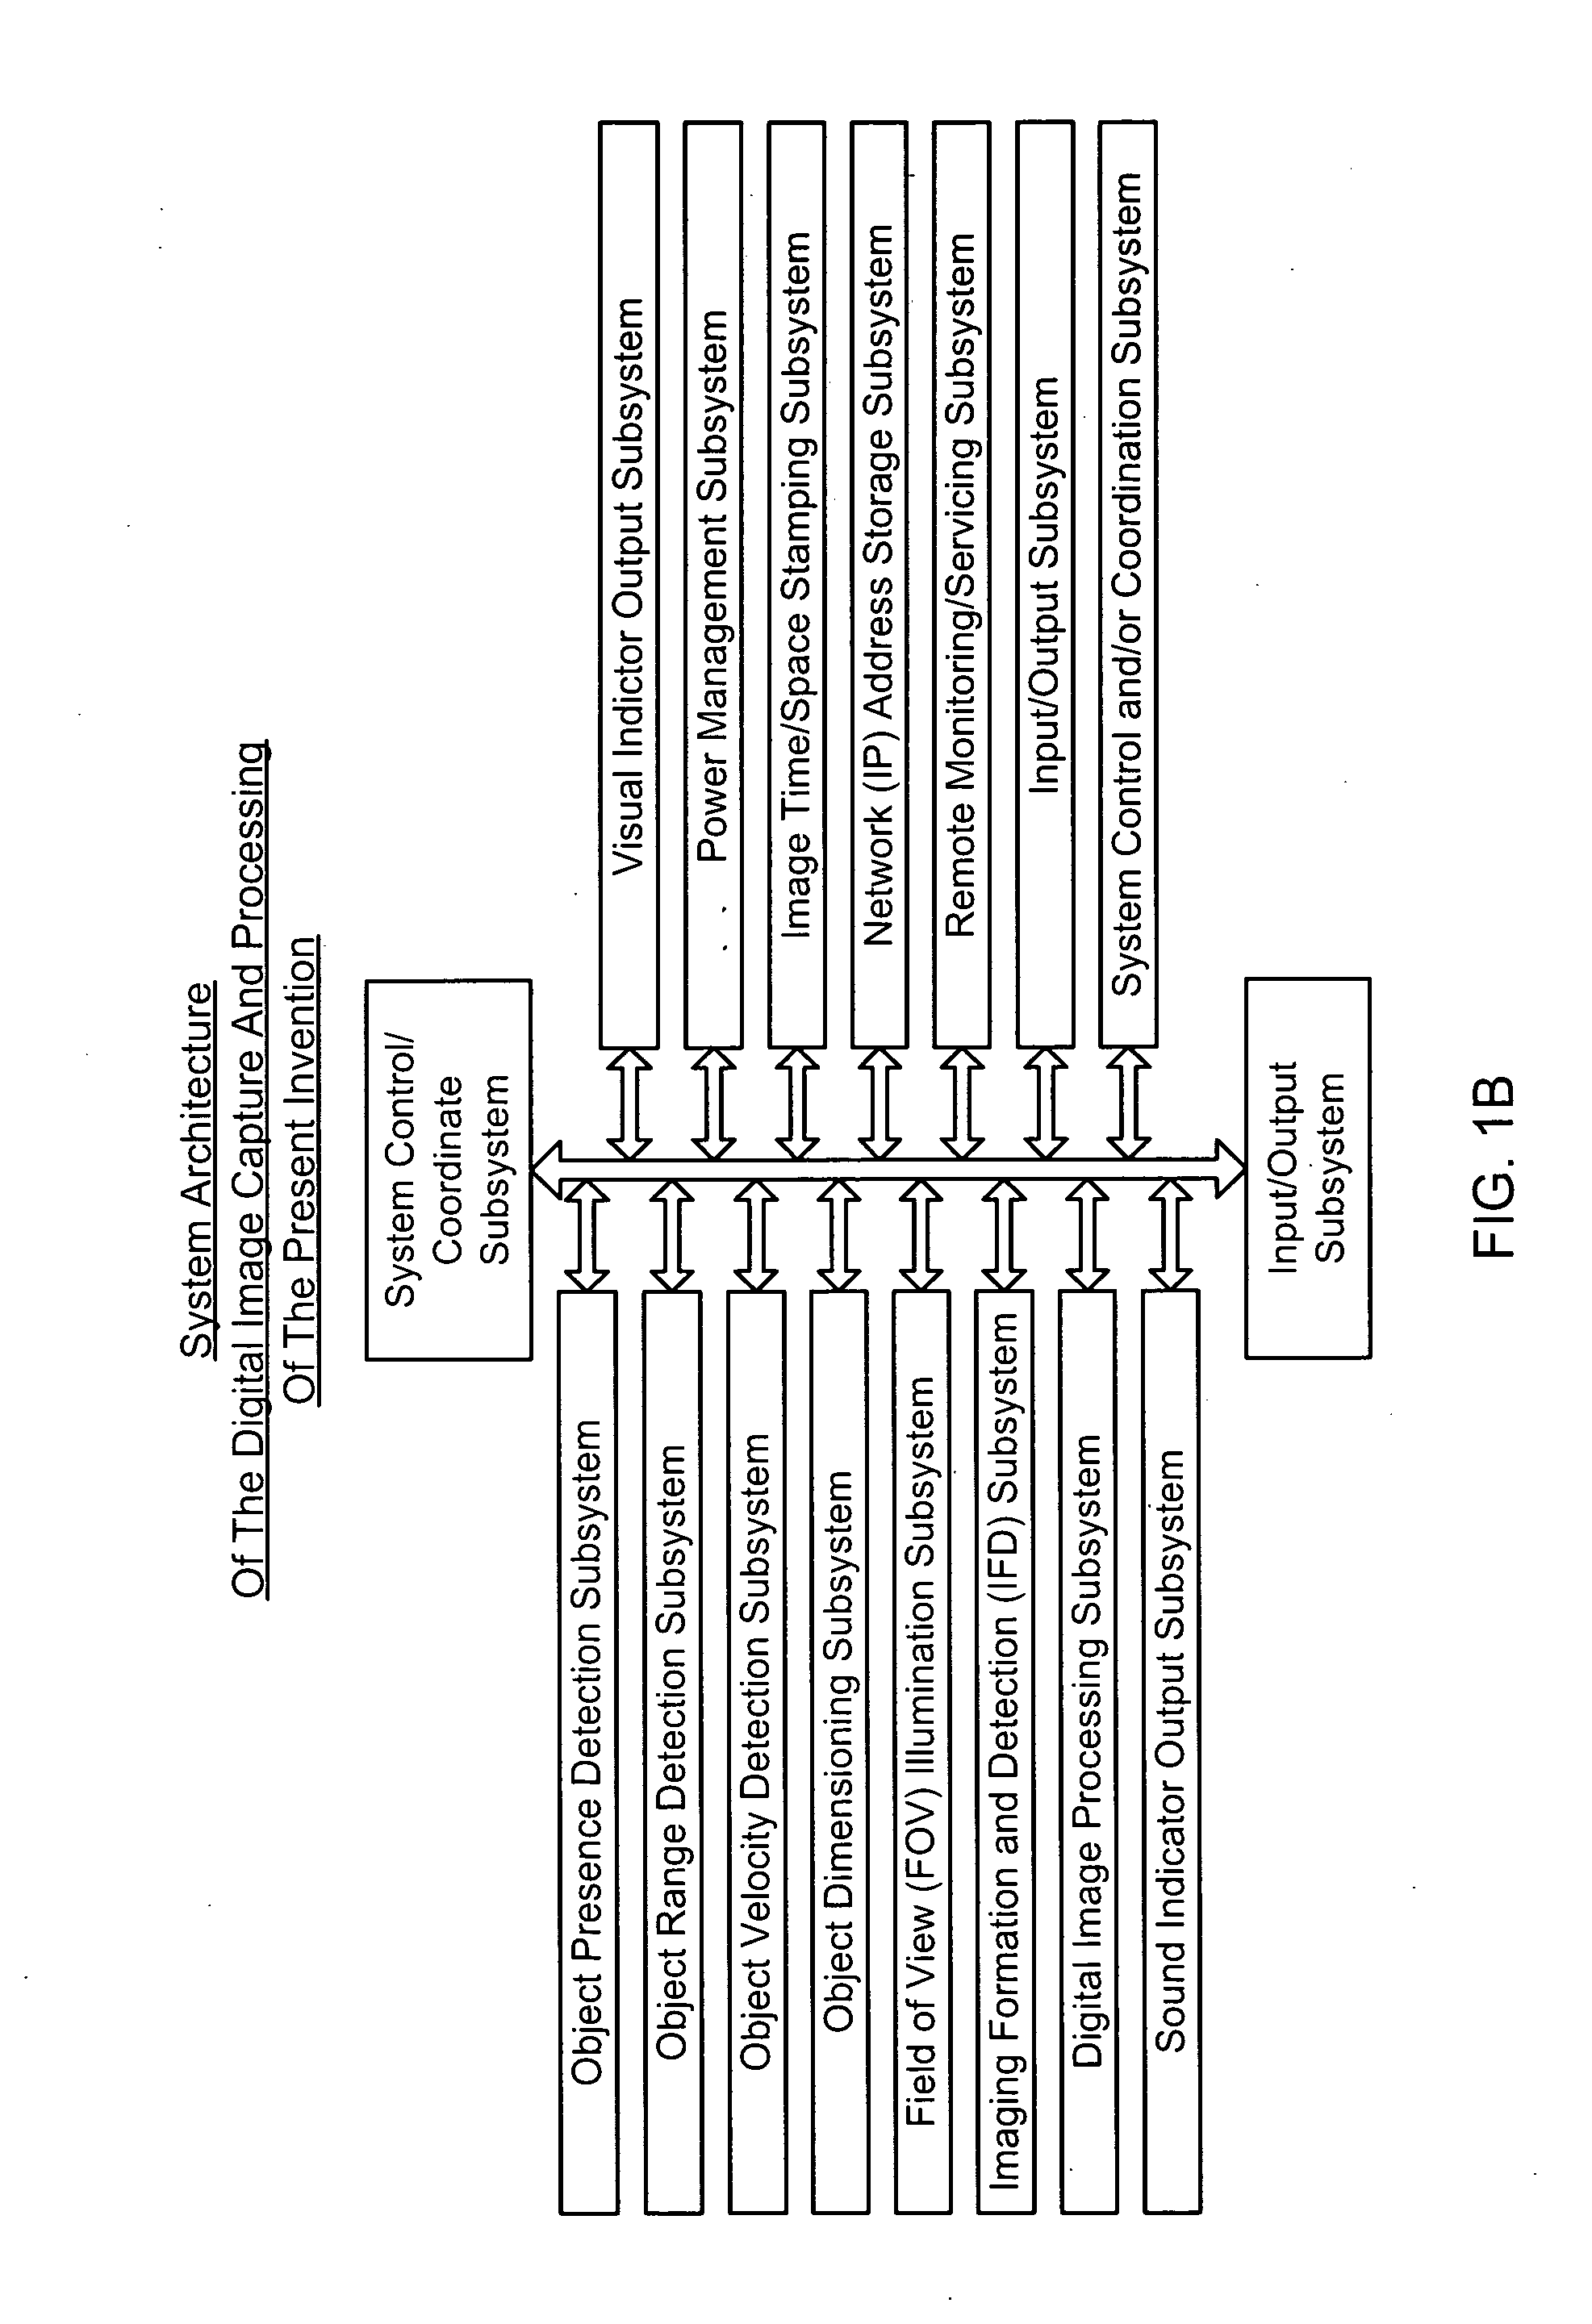 Method of modifying and/or extending the standard features and functions of a digital image capture and processing system